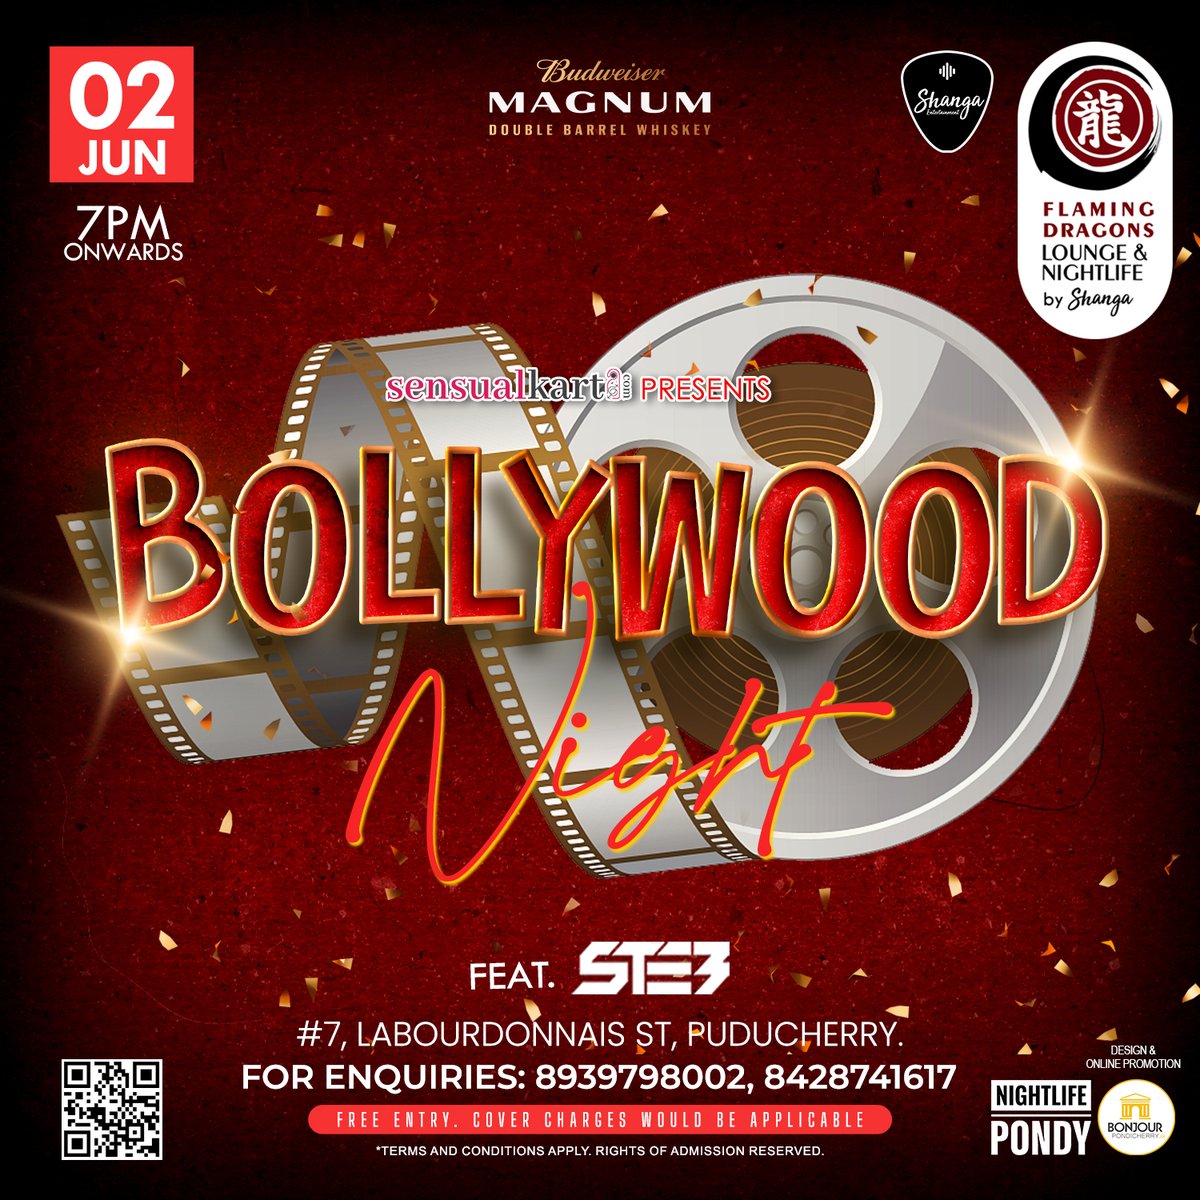 Bollywood Night - DJ Party on 02 June - 7pm onwards

Flaming Dragons Lounge and Nightlife
📍7, Labourdonnais St, #Puducherry
☎️: +91 8939798002

#pondicherry #flamingdragons #bonjourpondicherry #pondicherrynightlife #pondicherrytourism #nightlife #bollywoodnight #bollywooddj